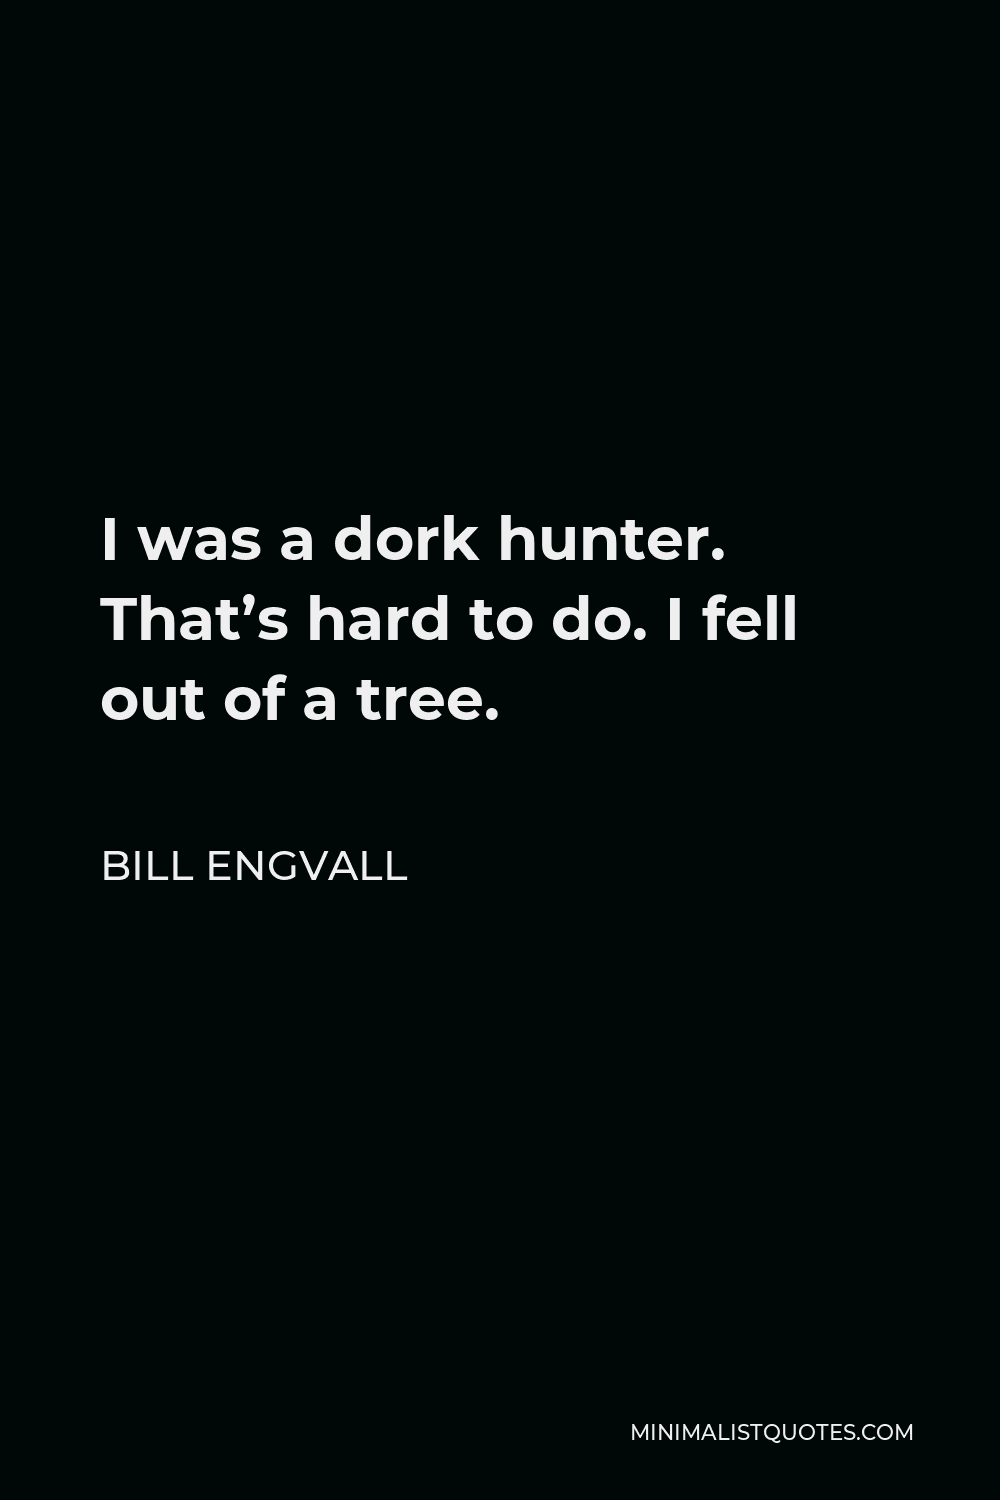 Bill Engvall Quote - I was a dork hunter. That’s hard to do. I fell out of a tree.